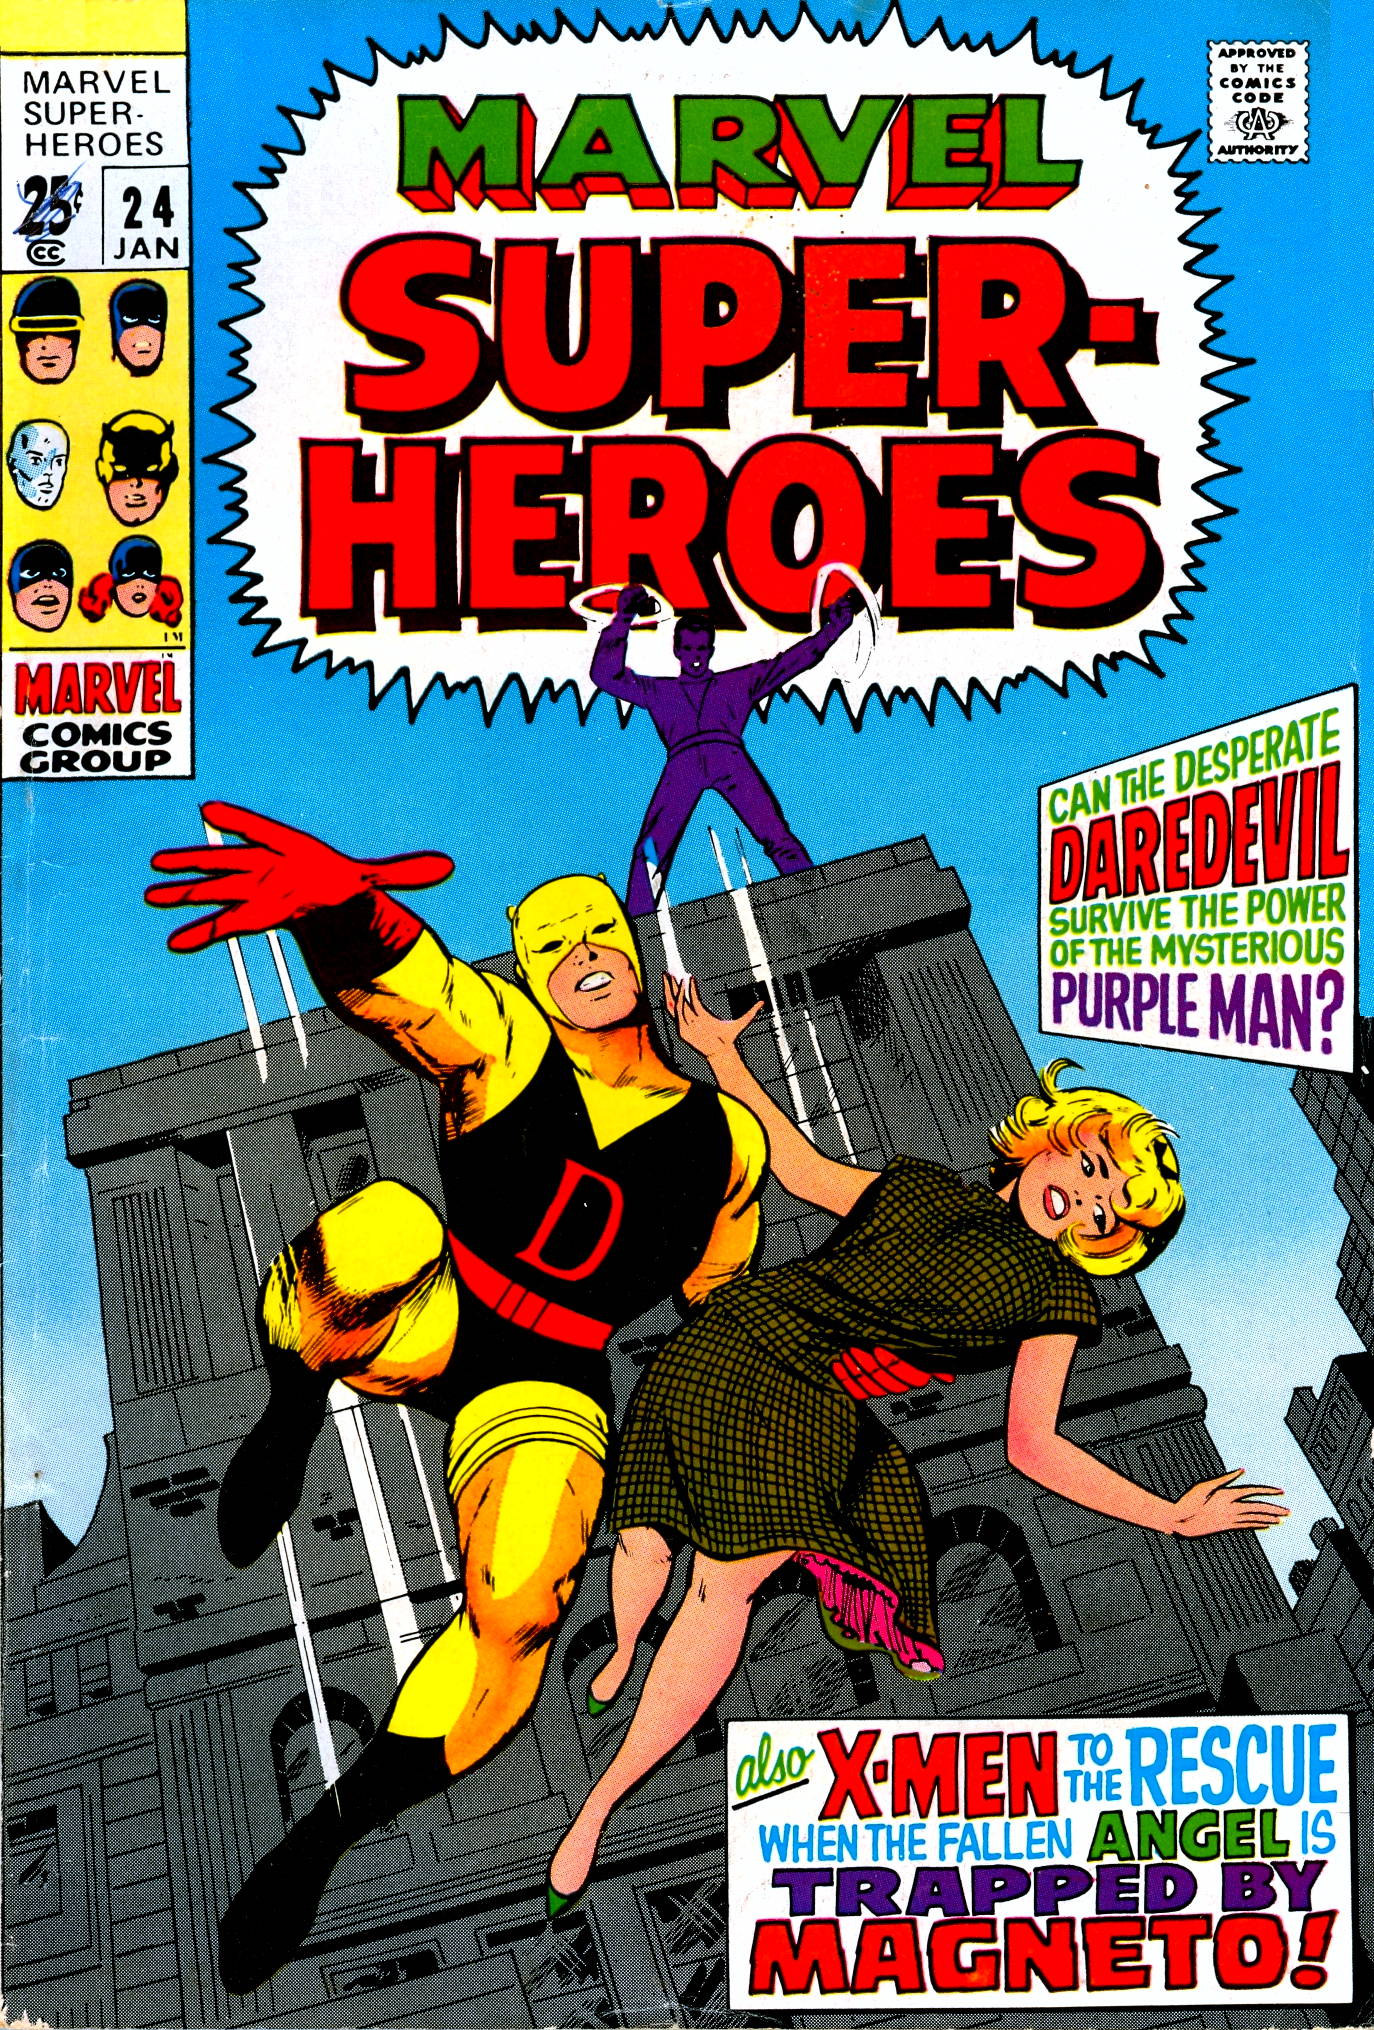 Read online Marvel Super-Heroes comic -  Issue #24 - 1